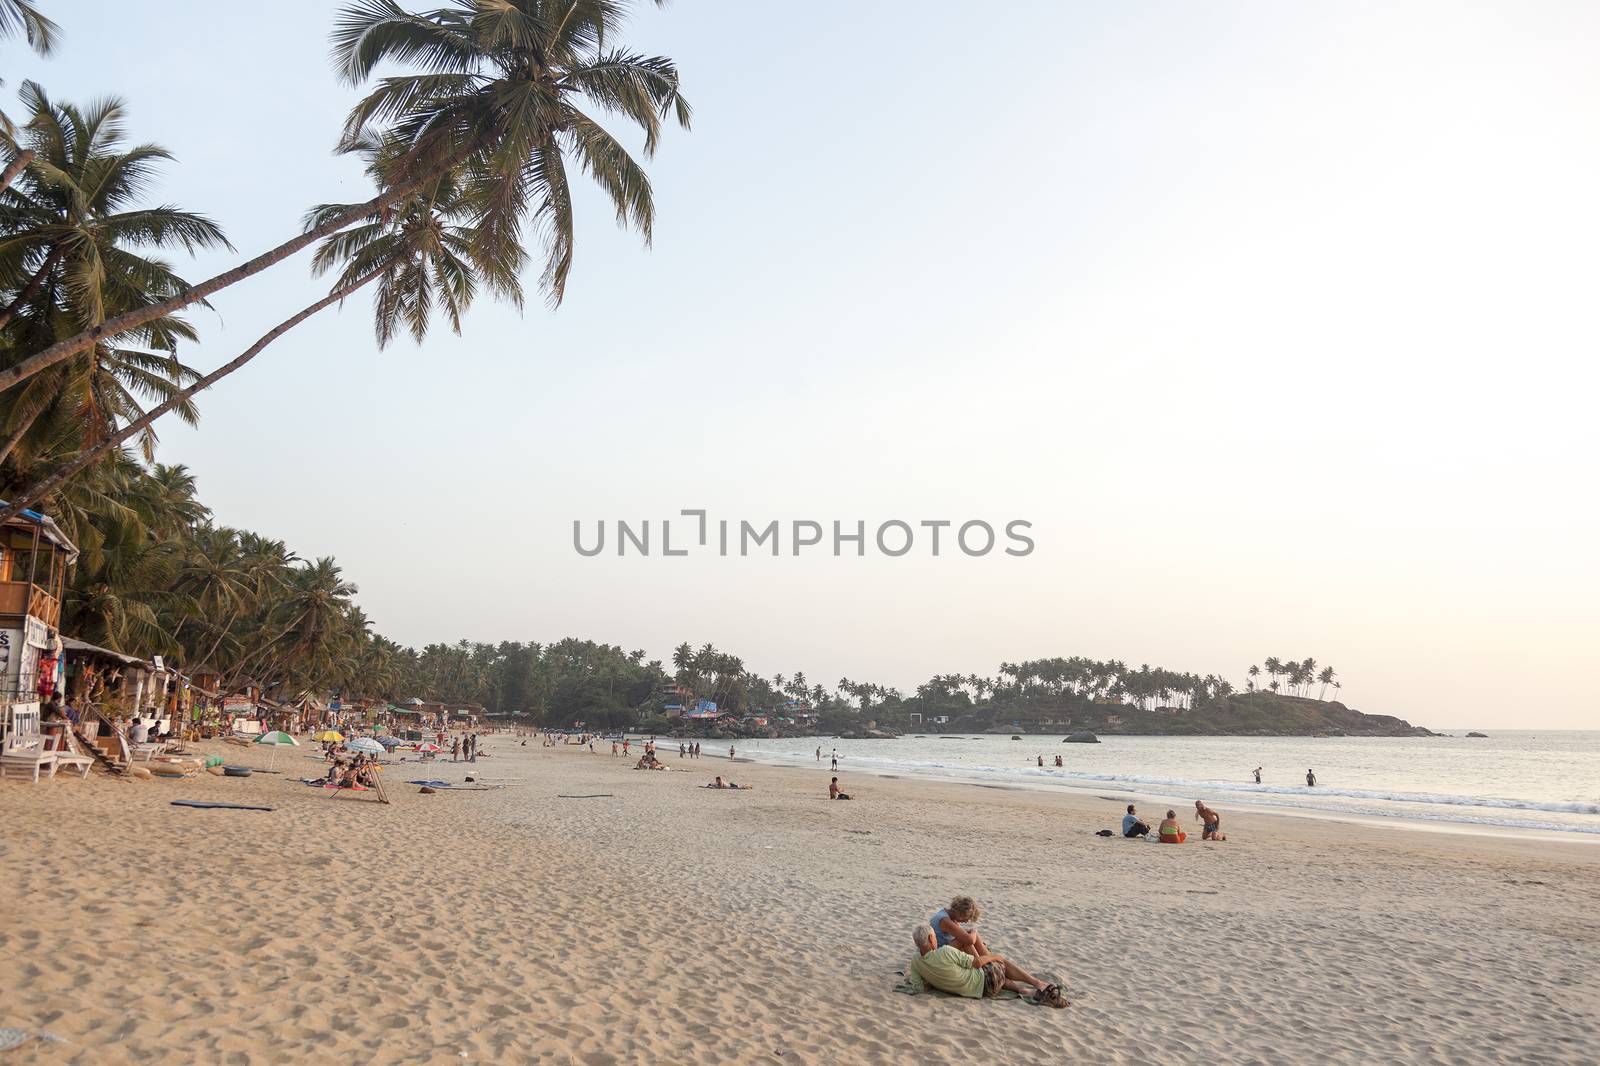 Palolem, India - January 4, 2013: Palolem beach in the south of Goa in India with coconut palm trees in the back. There mostly western tourists on the sand and coconut huts and restaurants in the back.